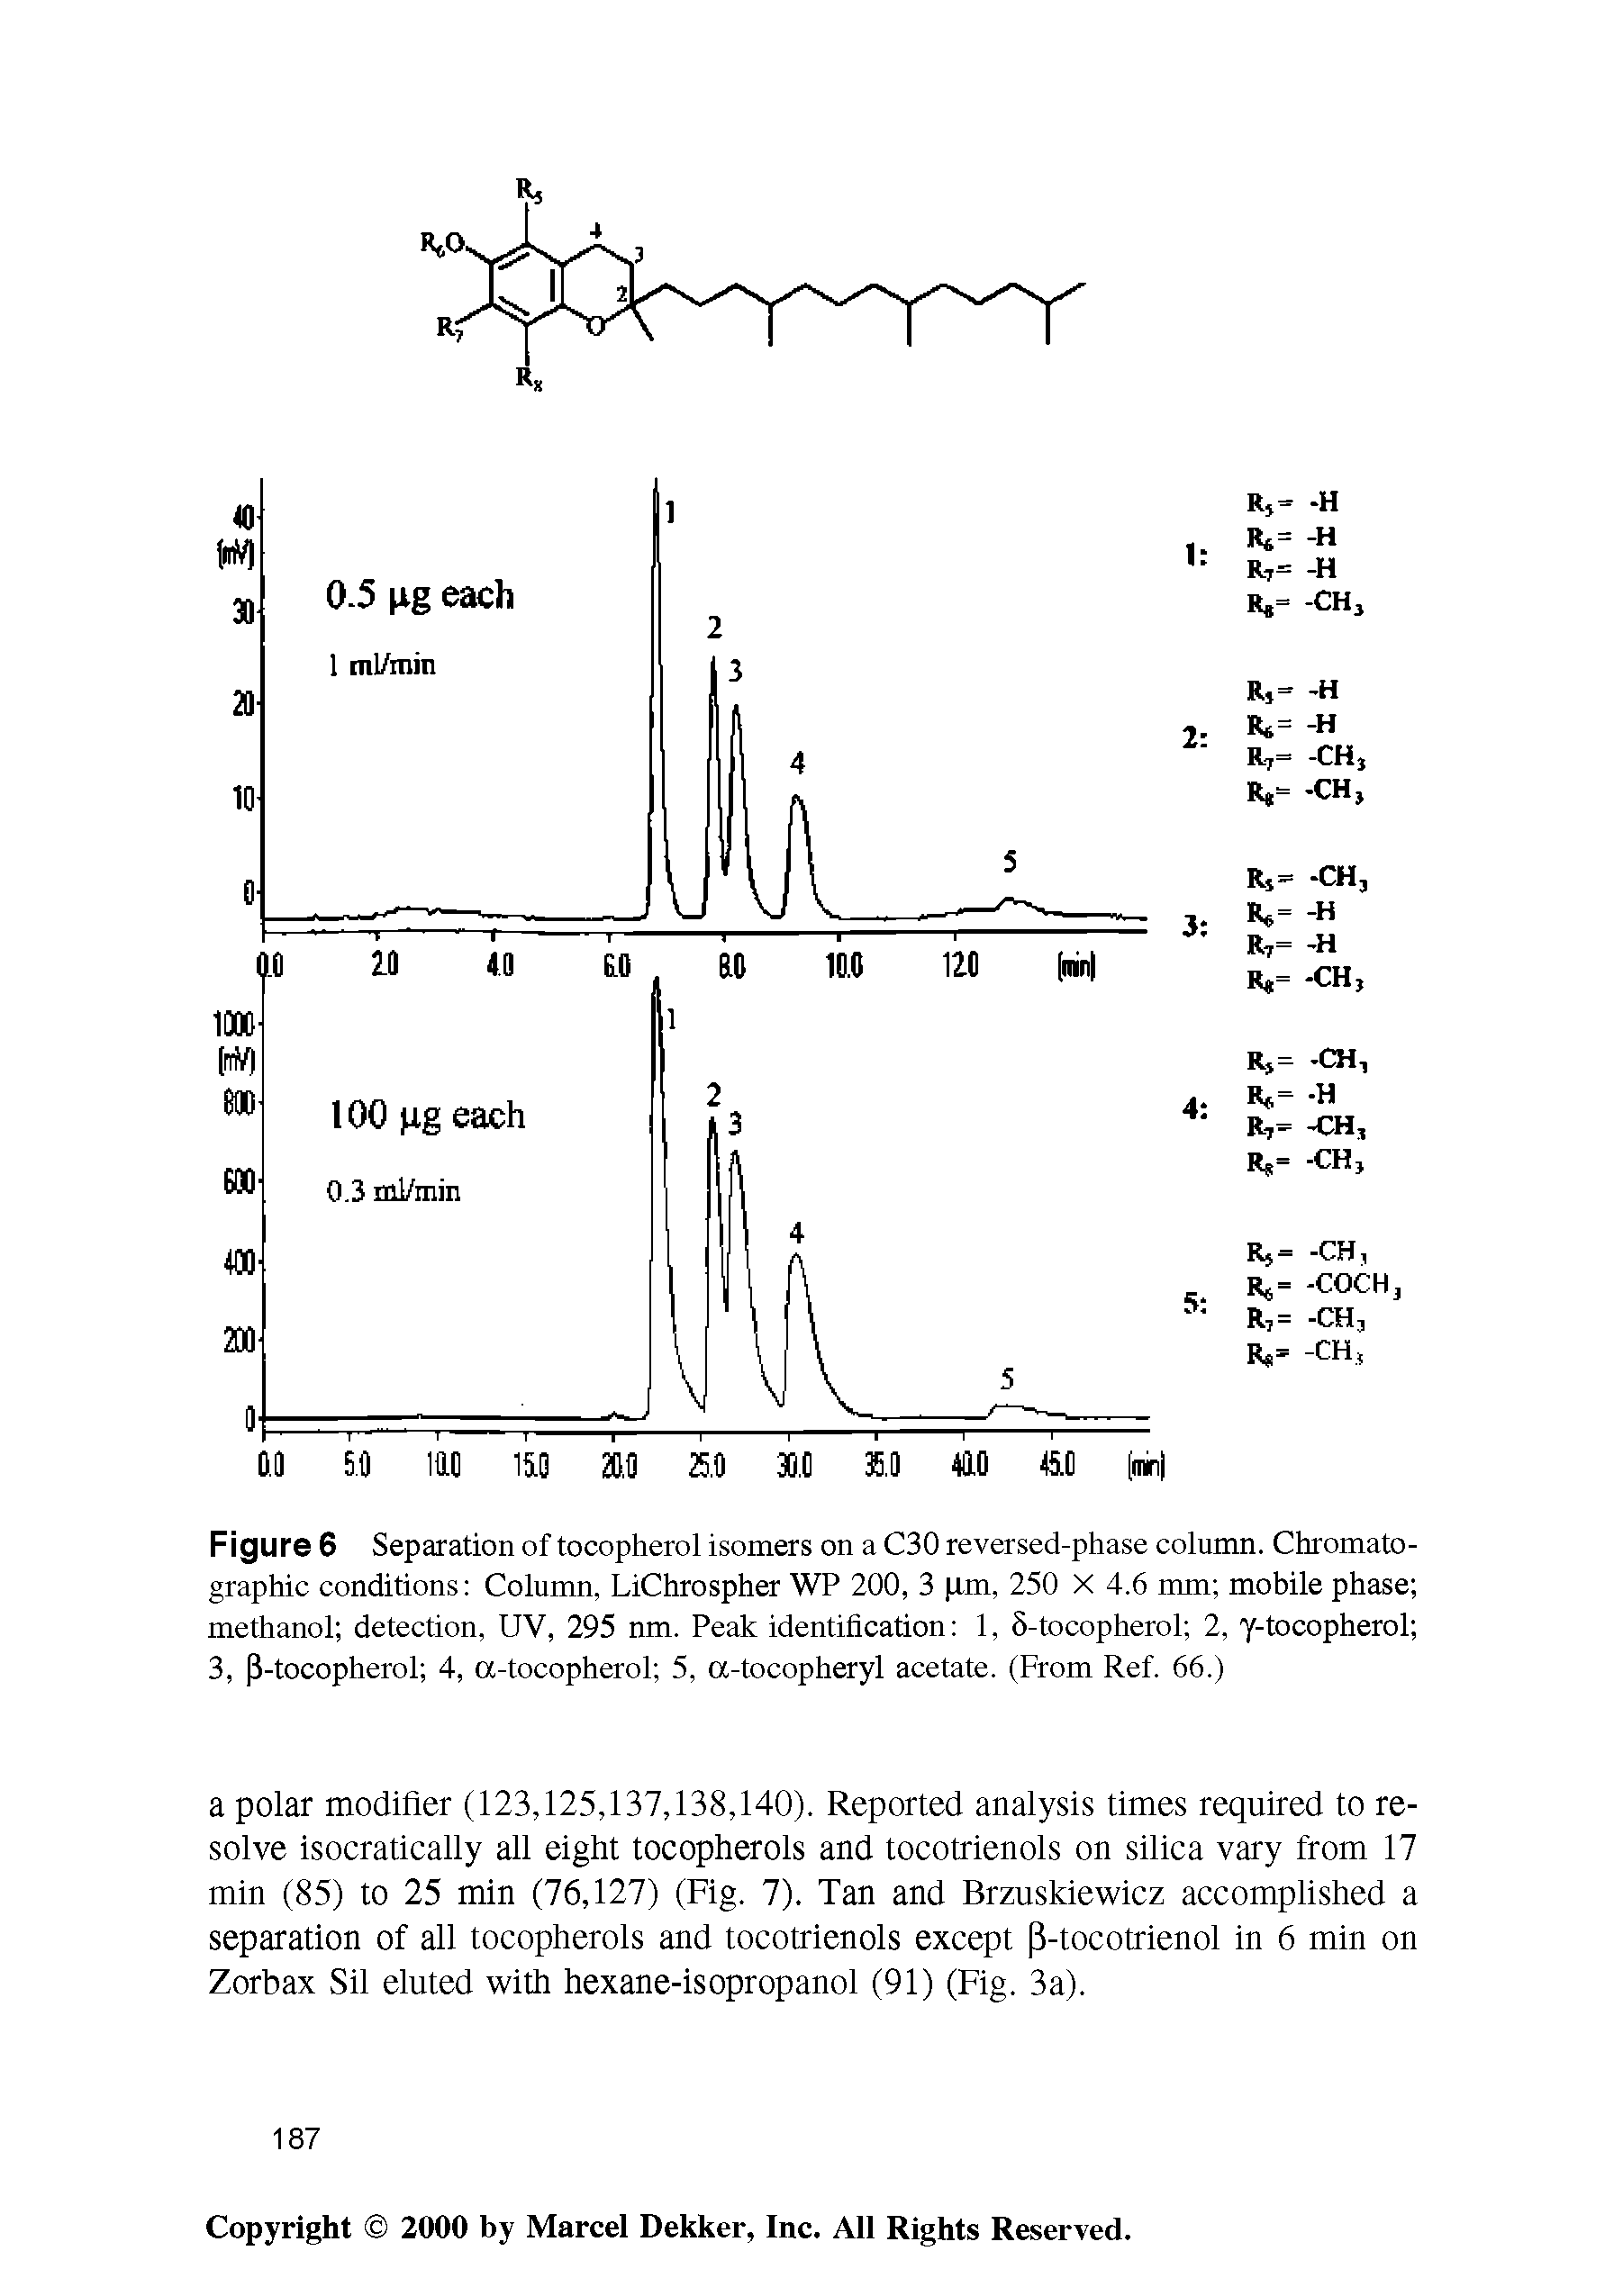 Figure 6 Separation of tocopherol isomers on a C30 reversed-phase column. Chromatographic conditions Column, LiChrospher WP 200, 3 fim, 250 X 4.6 mm mobile phase methanol detection, UV, 295 nm. Peak identification 1, 5-tocopherol 2, y-tocopherol 3, P-tocopherol 4, a-tocopherol 5, a-tocopheryl acetate. (From Ref. 66.)...